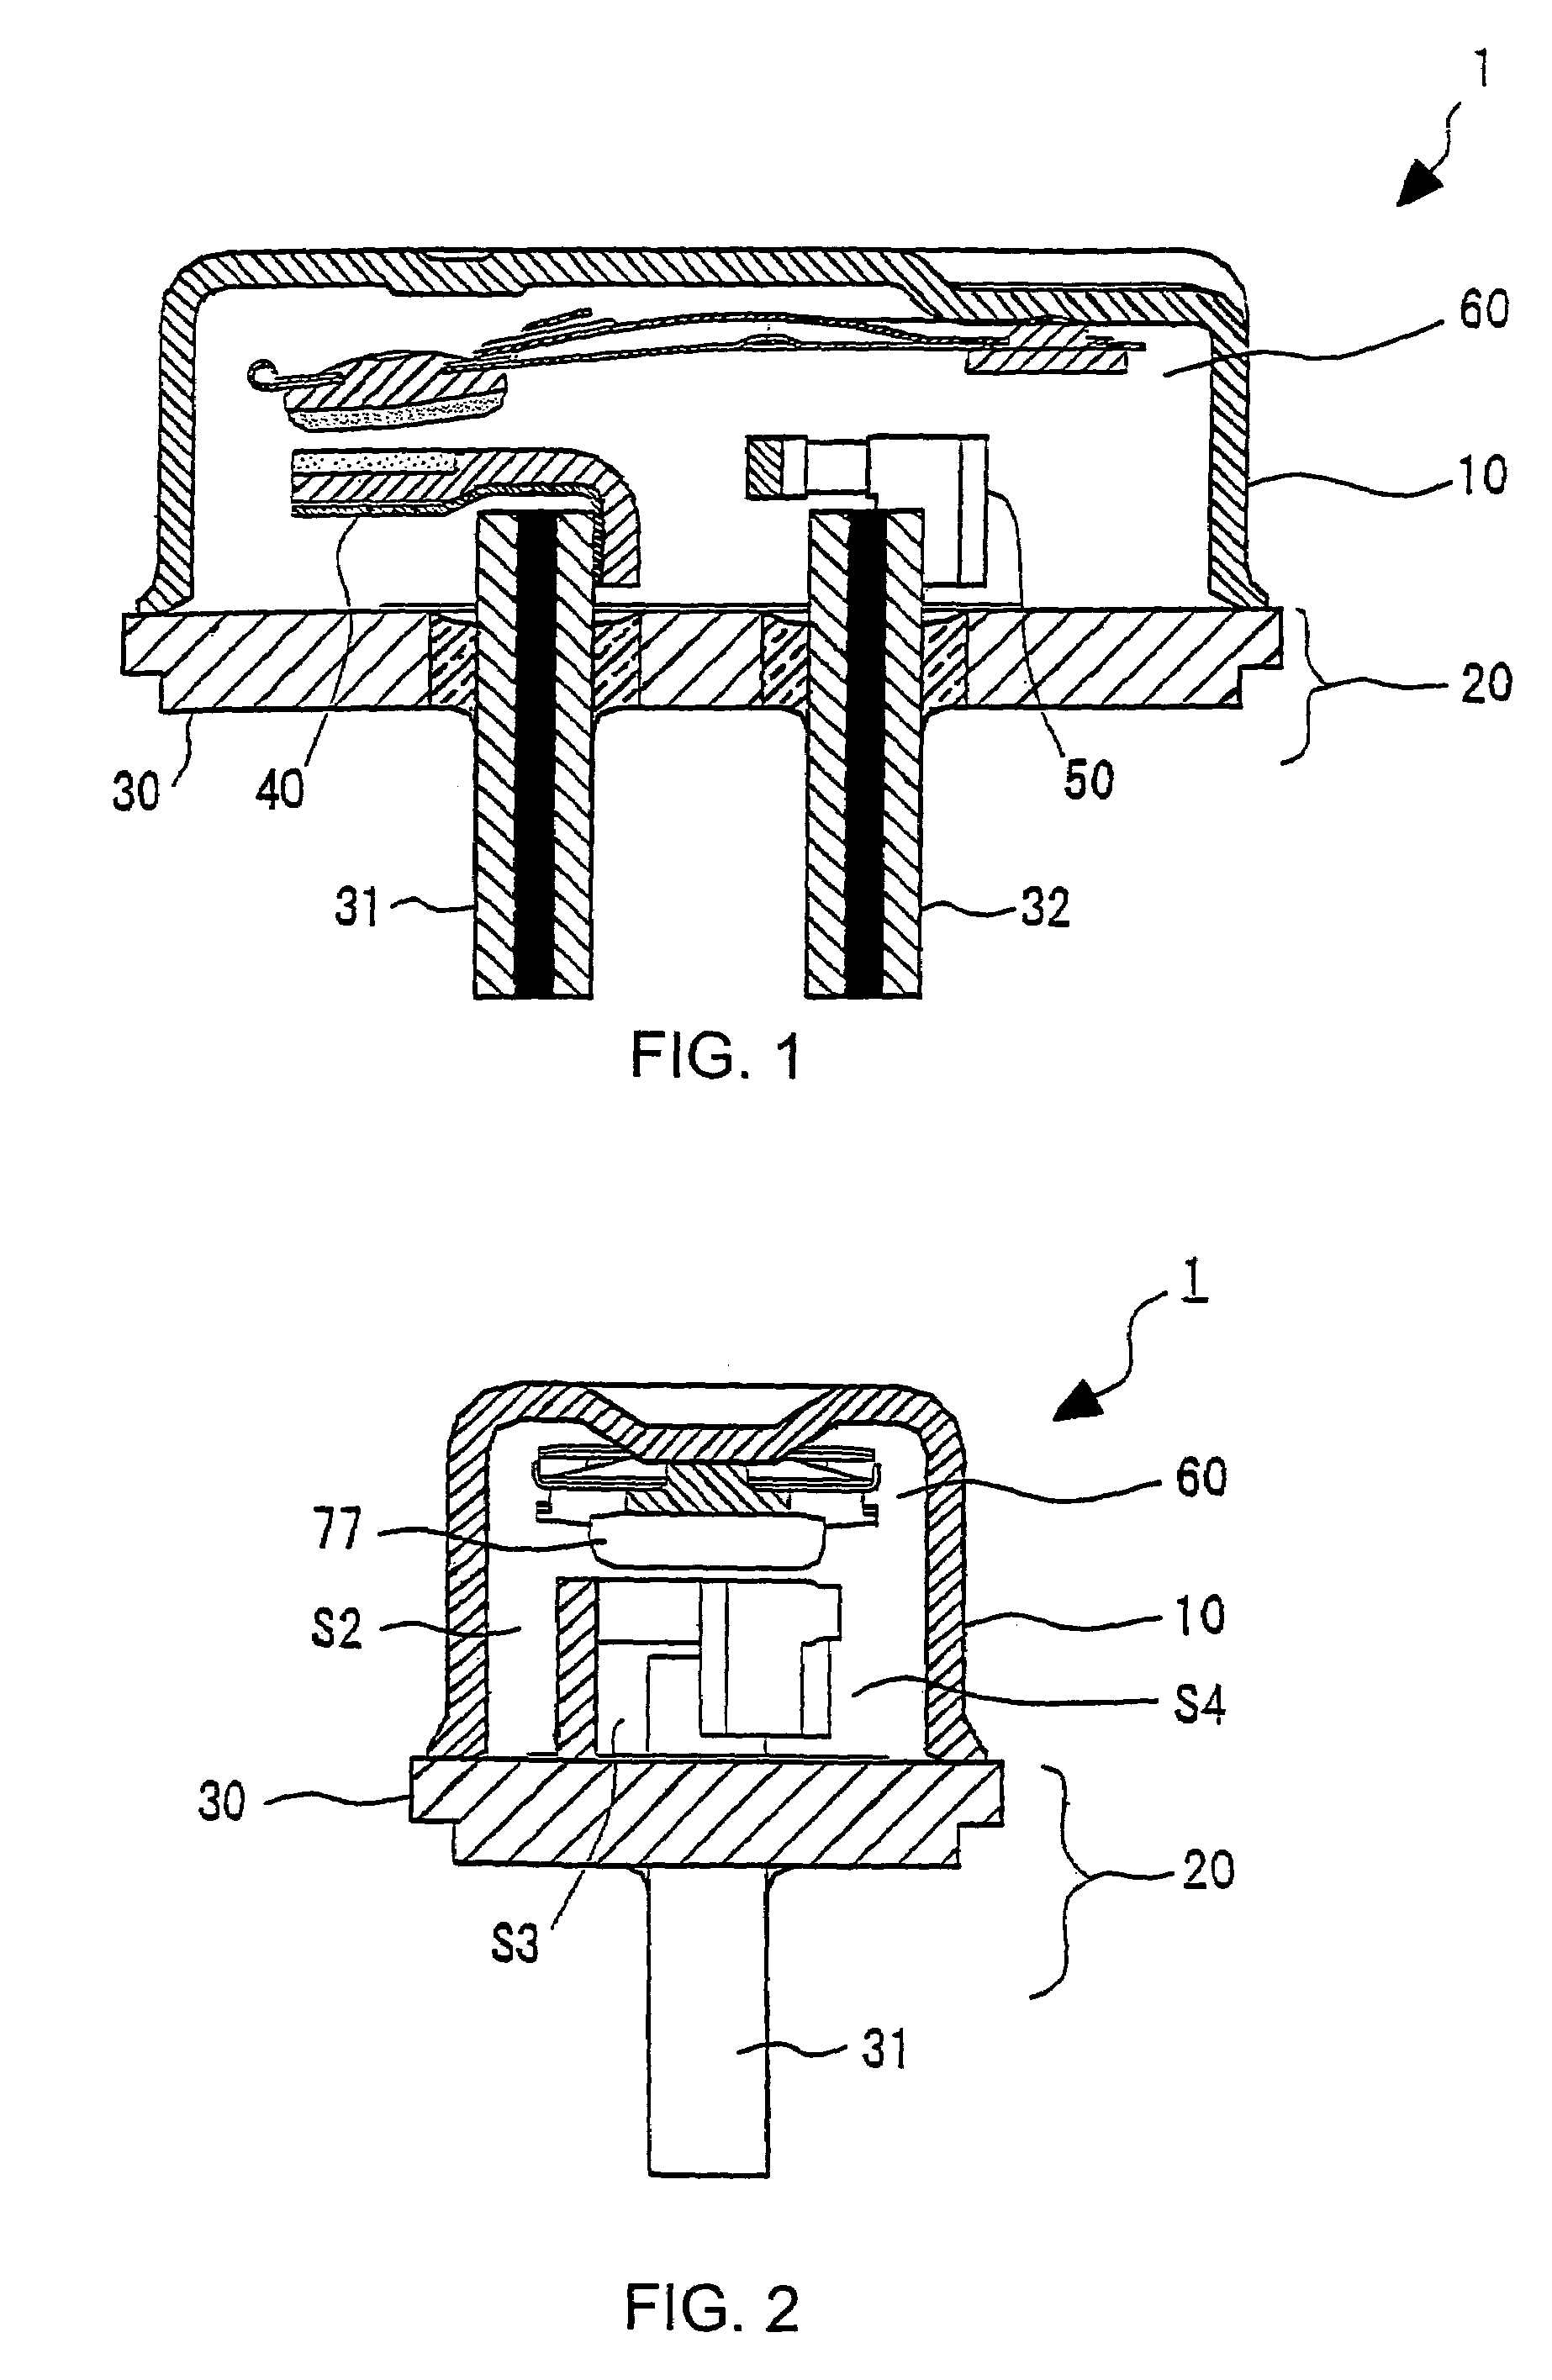 Motor protector particularly useful with hermetic electromotive compressors